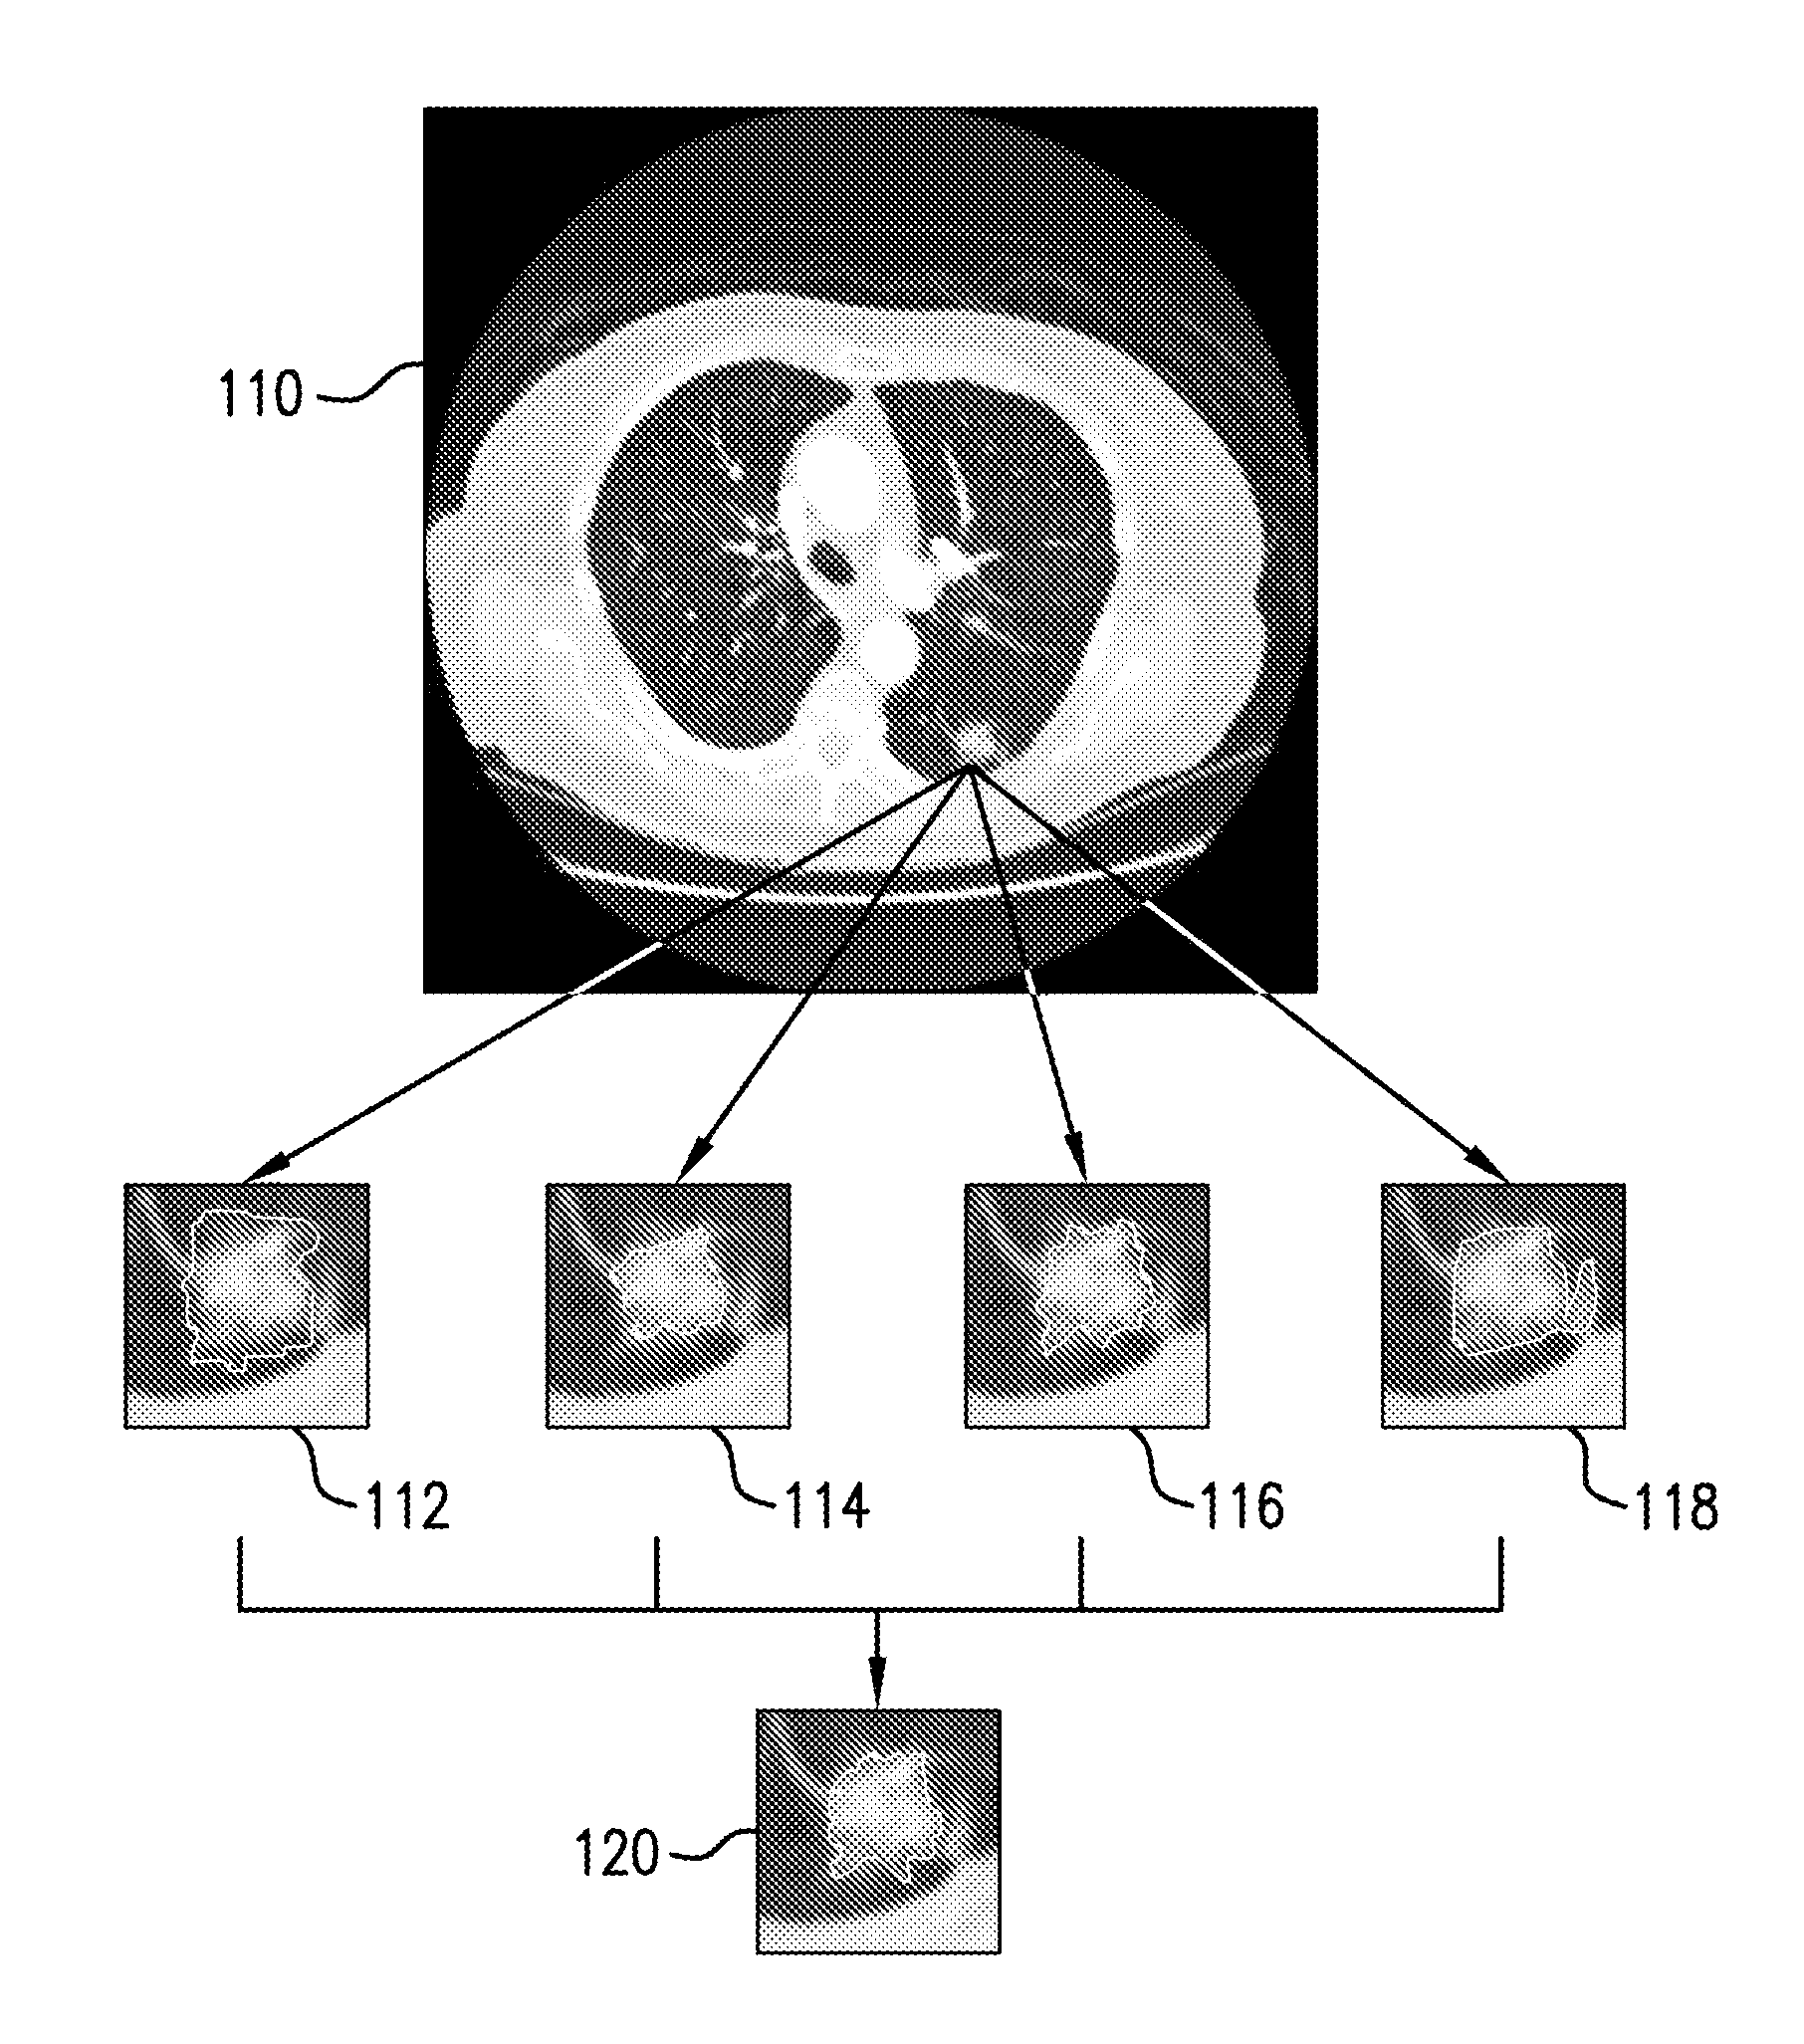 Method for adaptive computer-aided detection of pulmonary nodules in thoracic computed tomography images using hierarchical vector quantization and apparatus for same